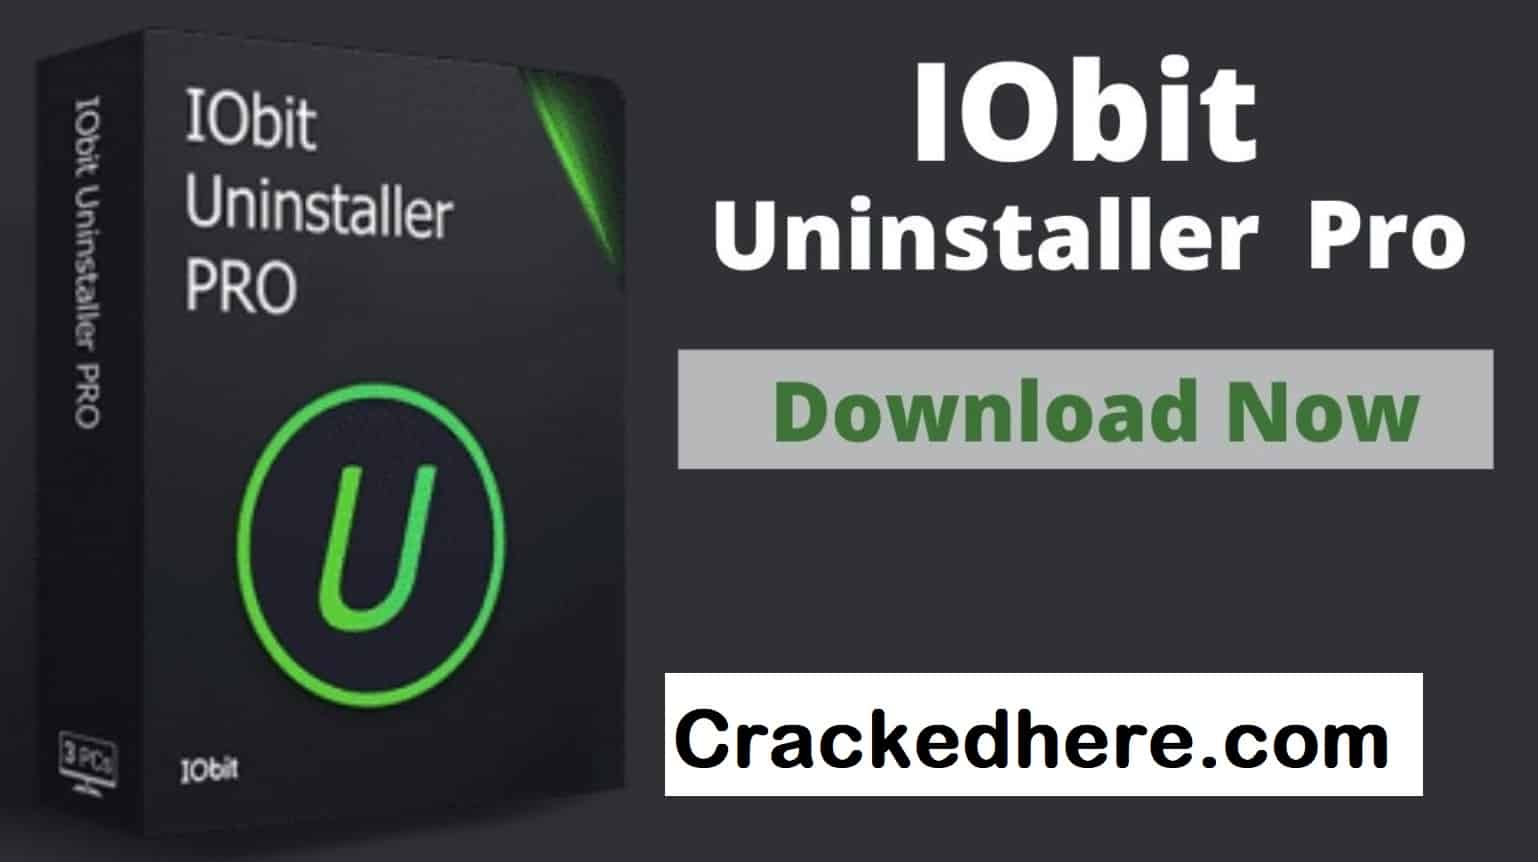 download the new for android IObit Uninstaller Pro 13.0.0.13